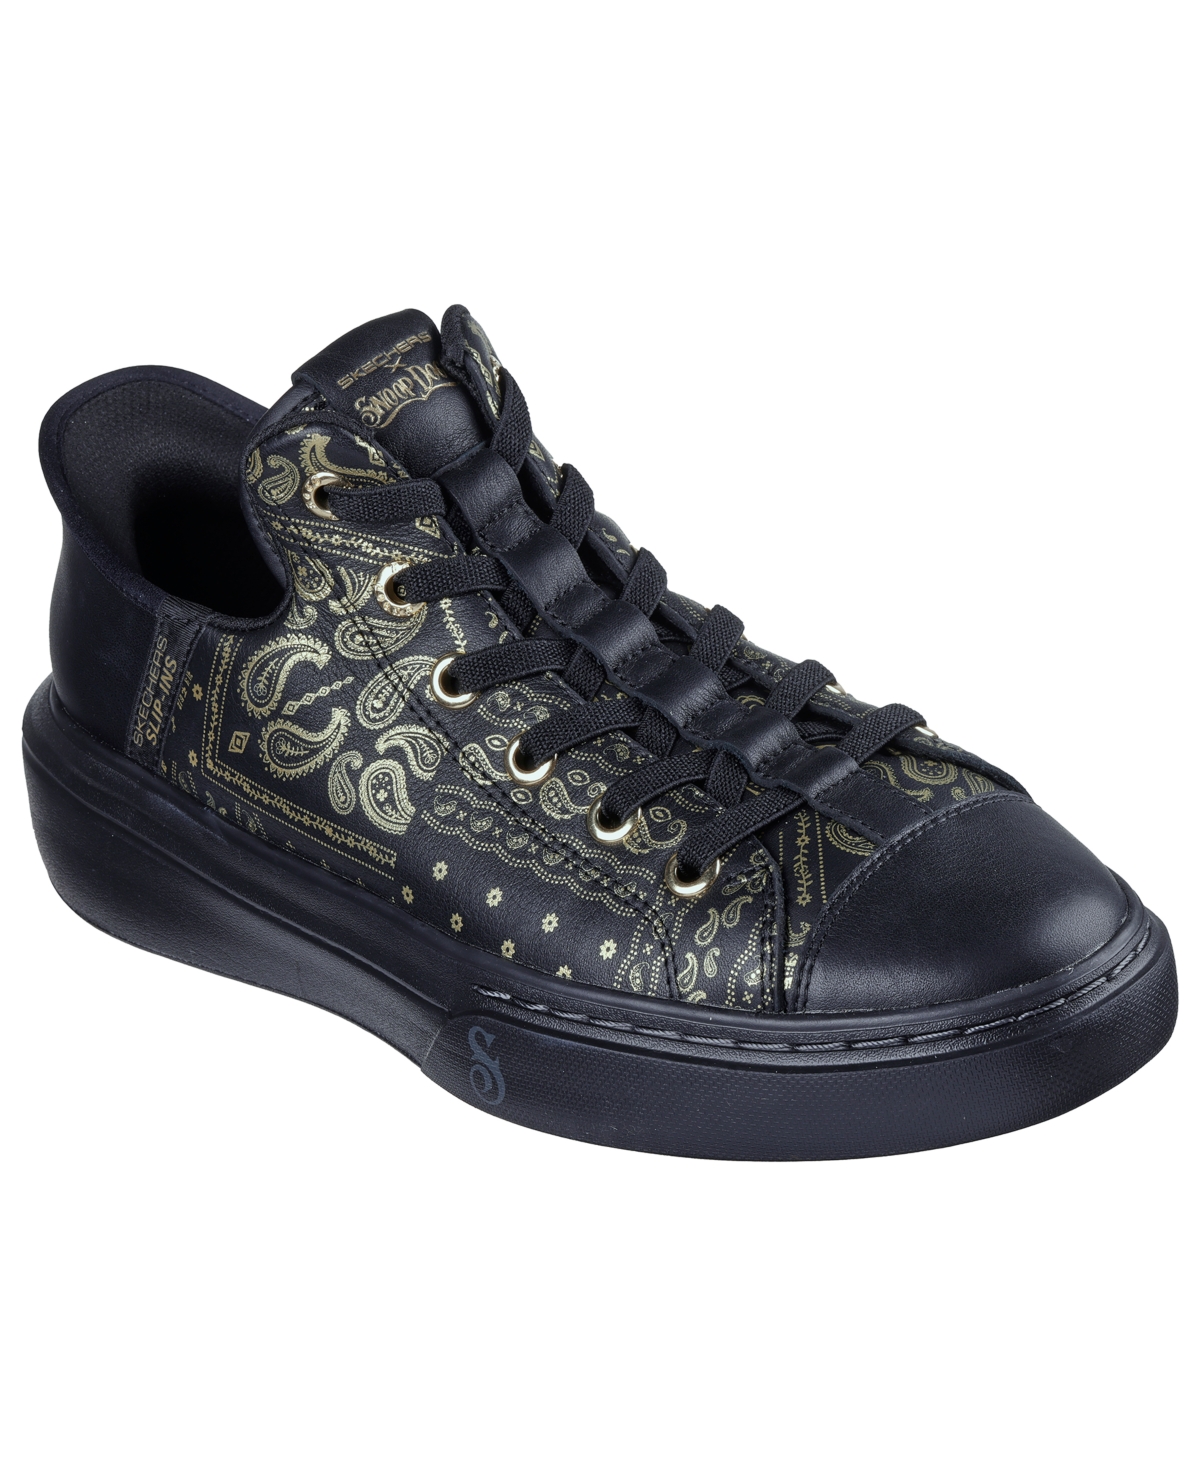 Men's Casual Sneakers from Finish Line - Black/Gold